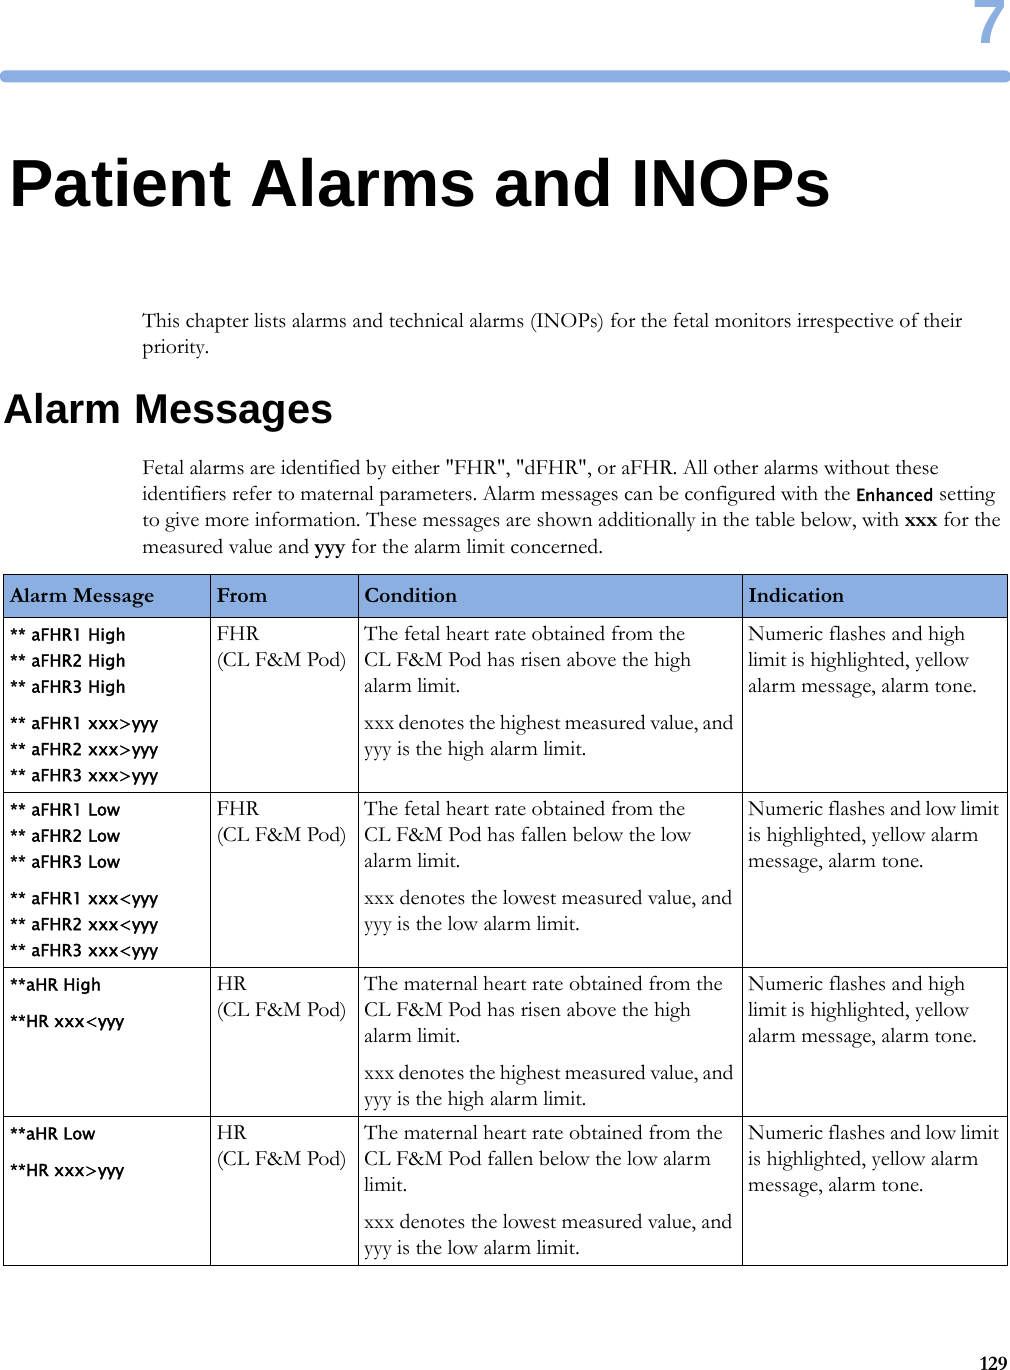 71297Patient Alarms and INOPsThis chapter lists alarms and technical alarms (INOPs) for the fetal monitors irrespective of their priority.Alarm MessagesFetal alarms are identified by either &quot;FHR&quot;, &quot;dFHR&quot;, or aFHR. All other alarms without these identifiers refer to maternal parameters. Alarm messages can be configured with the Enhanced setting to give more information. These messages are shown additionally in the table below, with xxx for the measured value and yyy for the alarm limit concerned.Alarm Message From Condition Indication** aFHR1 High ** aFHR2 High ** aFHR3 High** aFHR1 xxx&gt;yyy ** aFHR2 xxx&gt;yyy ** aFHR3 xxx&gt;yyyFHR (CL F&amp;M Pod)The fetal heart rate obtained from the CL F&amp;M Pod has risen above the high alarm limit.xxx denotes the highest measured value, and yyy is the high alarm limit.Numeric flashes and high limit is highlighted, yellow alarm message, alarm tone.** aFHR1 Low ** aFHR2 Low ** aFHR3 Low** aFHR1 xxx&lt;yyy ** aFHR2 xxx&lt;yyy ** aFHR3 xxx&lt;yyyFHR (CL F&amp;M Pod)The fetal heart rate obtained from the CL F&amp;M Pod has fallen below the low alarm limit.xxx denotes the lowest measured value, and yyy is the low alarm limit.Numeric flashes and low limit is highlighted, yellow alarm message, alarm tone.**aHR High**HR xxx&lt;yyyHR (CL F&amp;M Pod)The maternal heart rate obtained from the CL F&amp;M Pod has risen above the high alarm limit.xxx denotes the highest measured value, and yyy is the high alarm limit.Numeric flashes and high limit is highlighted, yellow alarm message, alarm tone.**aHR Low**HR xxx&gt;yyyHR (CL F&amp;M Pod)The maternal heart rate obtained from the CL F&amp;M Pod fallen below the low alarm limit.xxx denotes the lowest measured value, and yyy is the low alarm limit.Numeric flashes and low limit is highlighted, yellow alarm message, alarm tone.